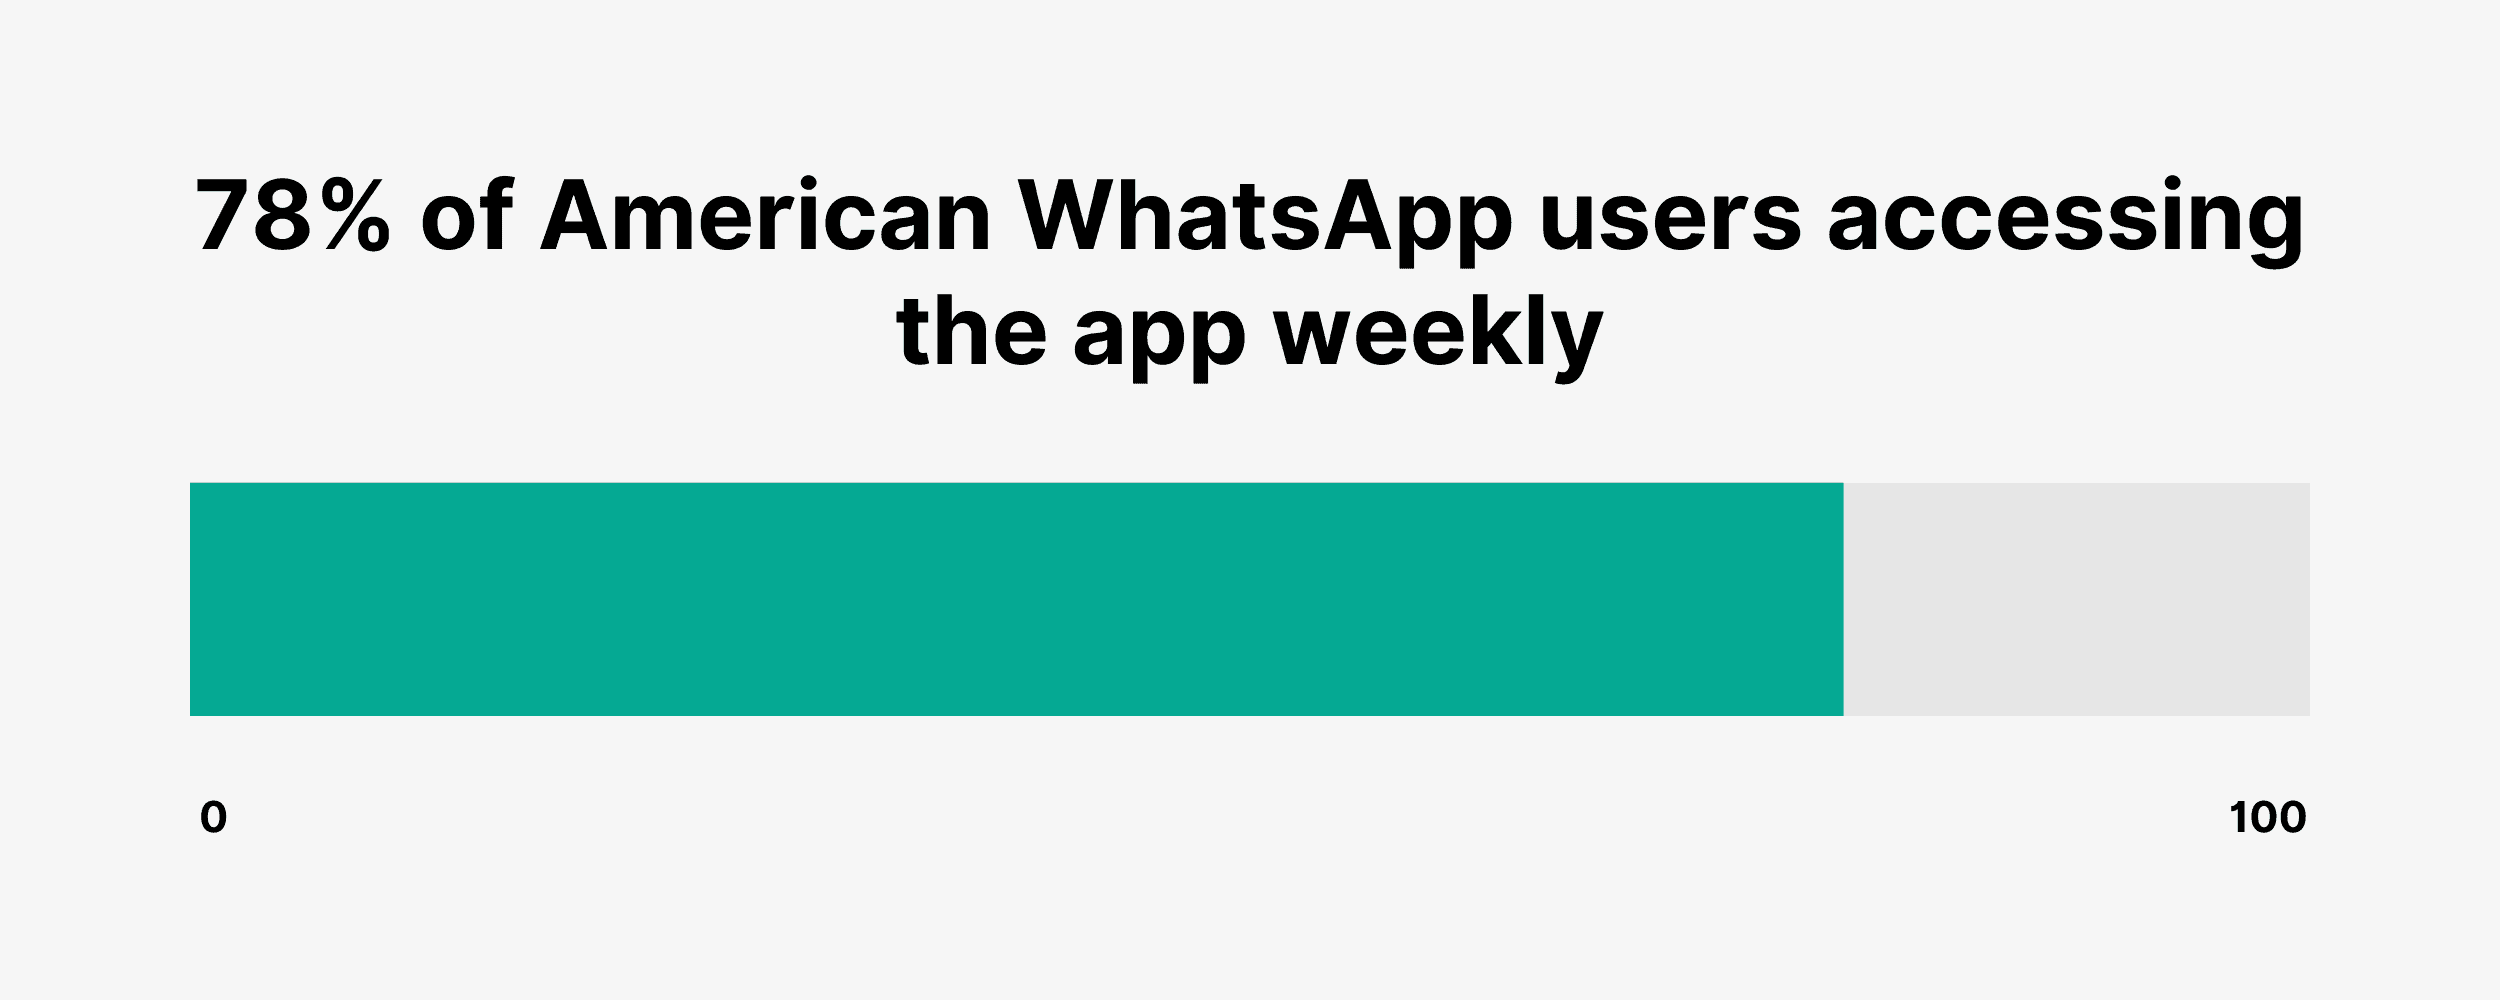 78% of American WhatsApp users accessing the app weekly